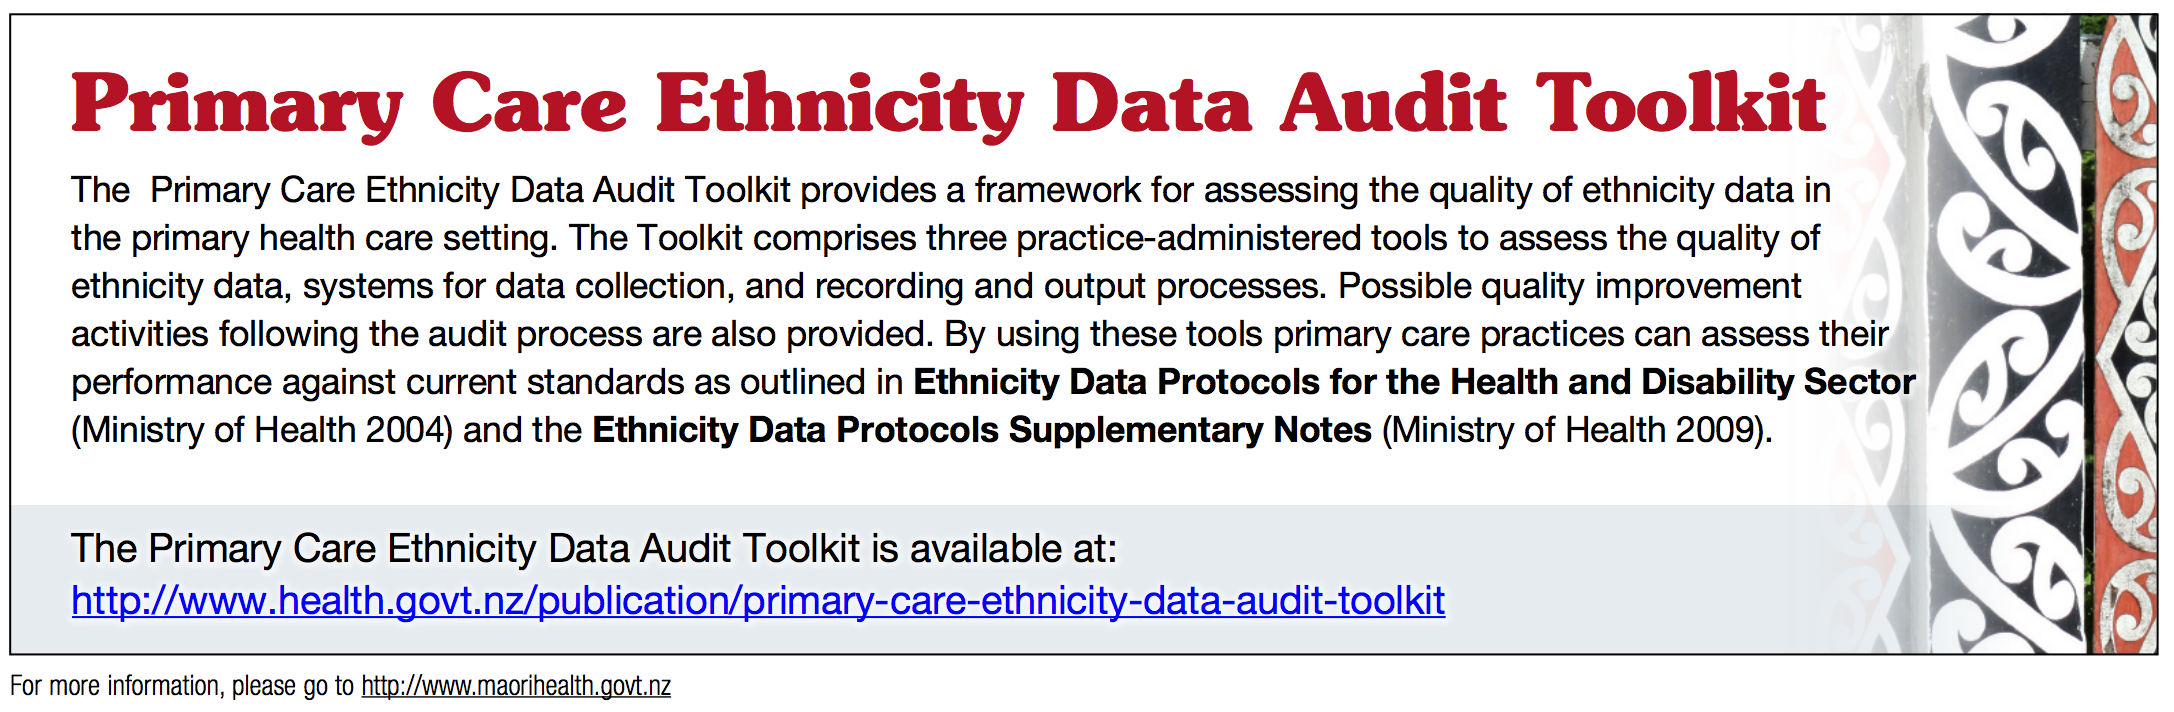 http://www.health.govt.nz/publication/primary-care-ethnicity-data-audit-toolkit